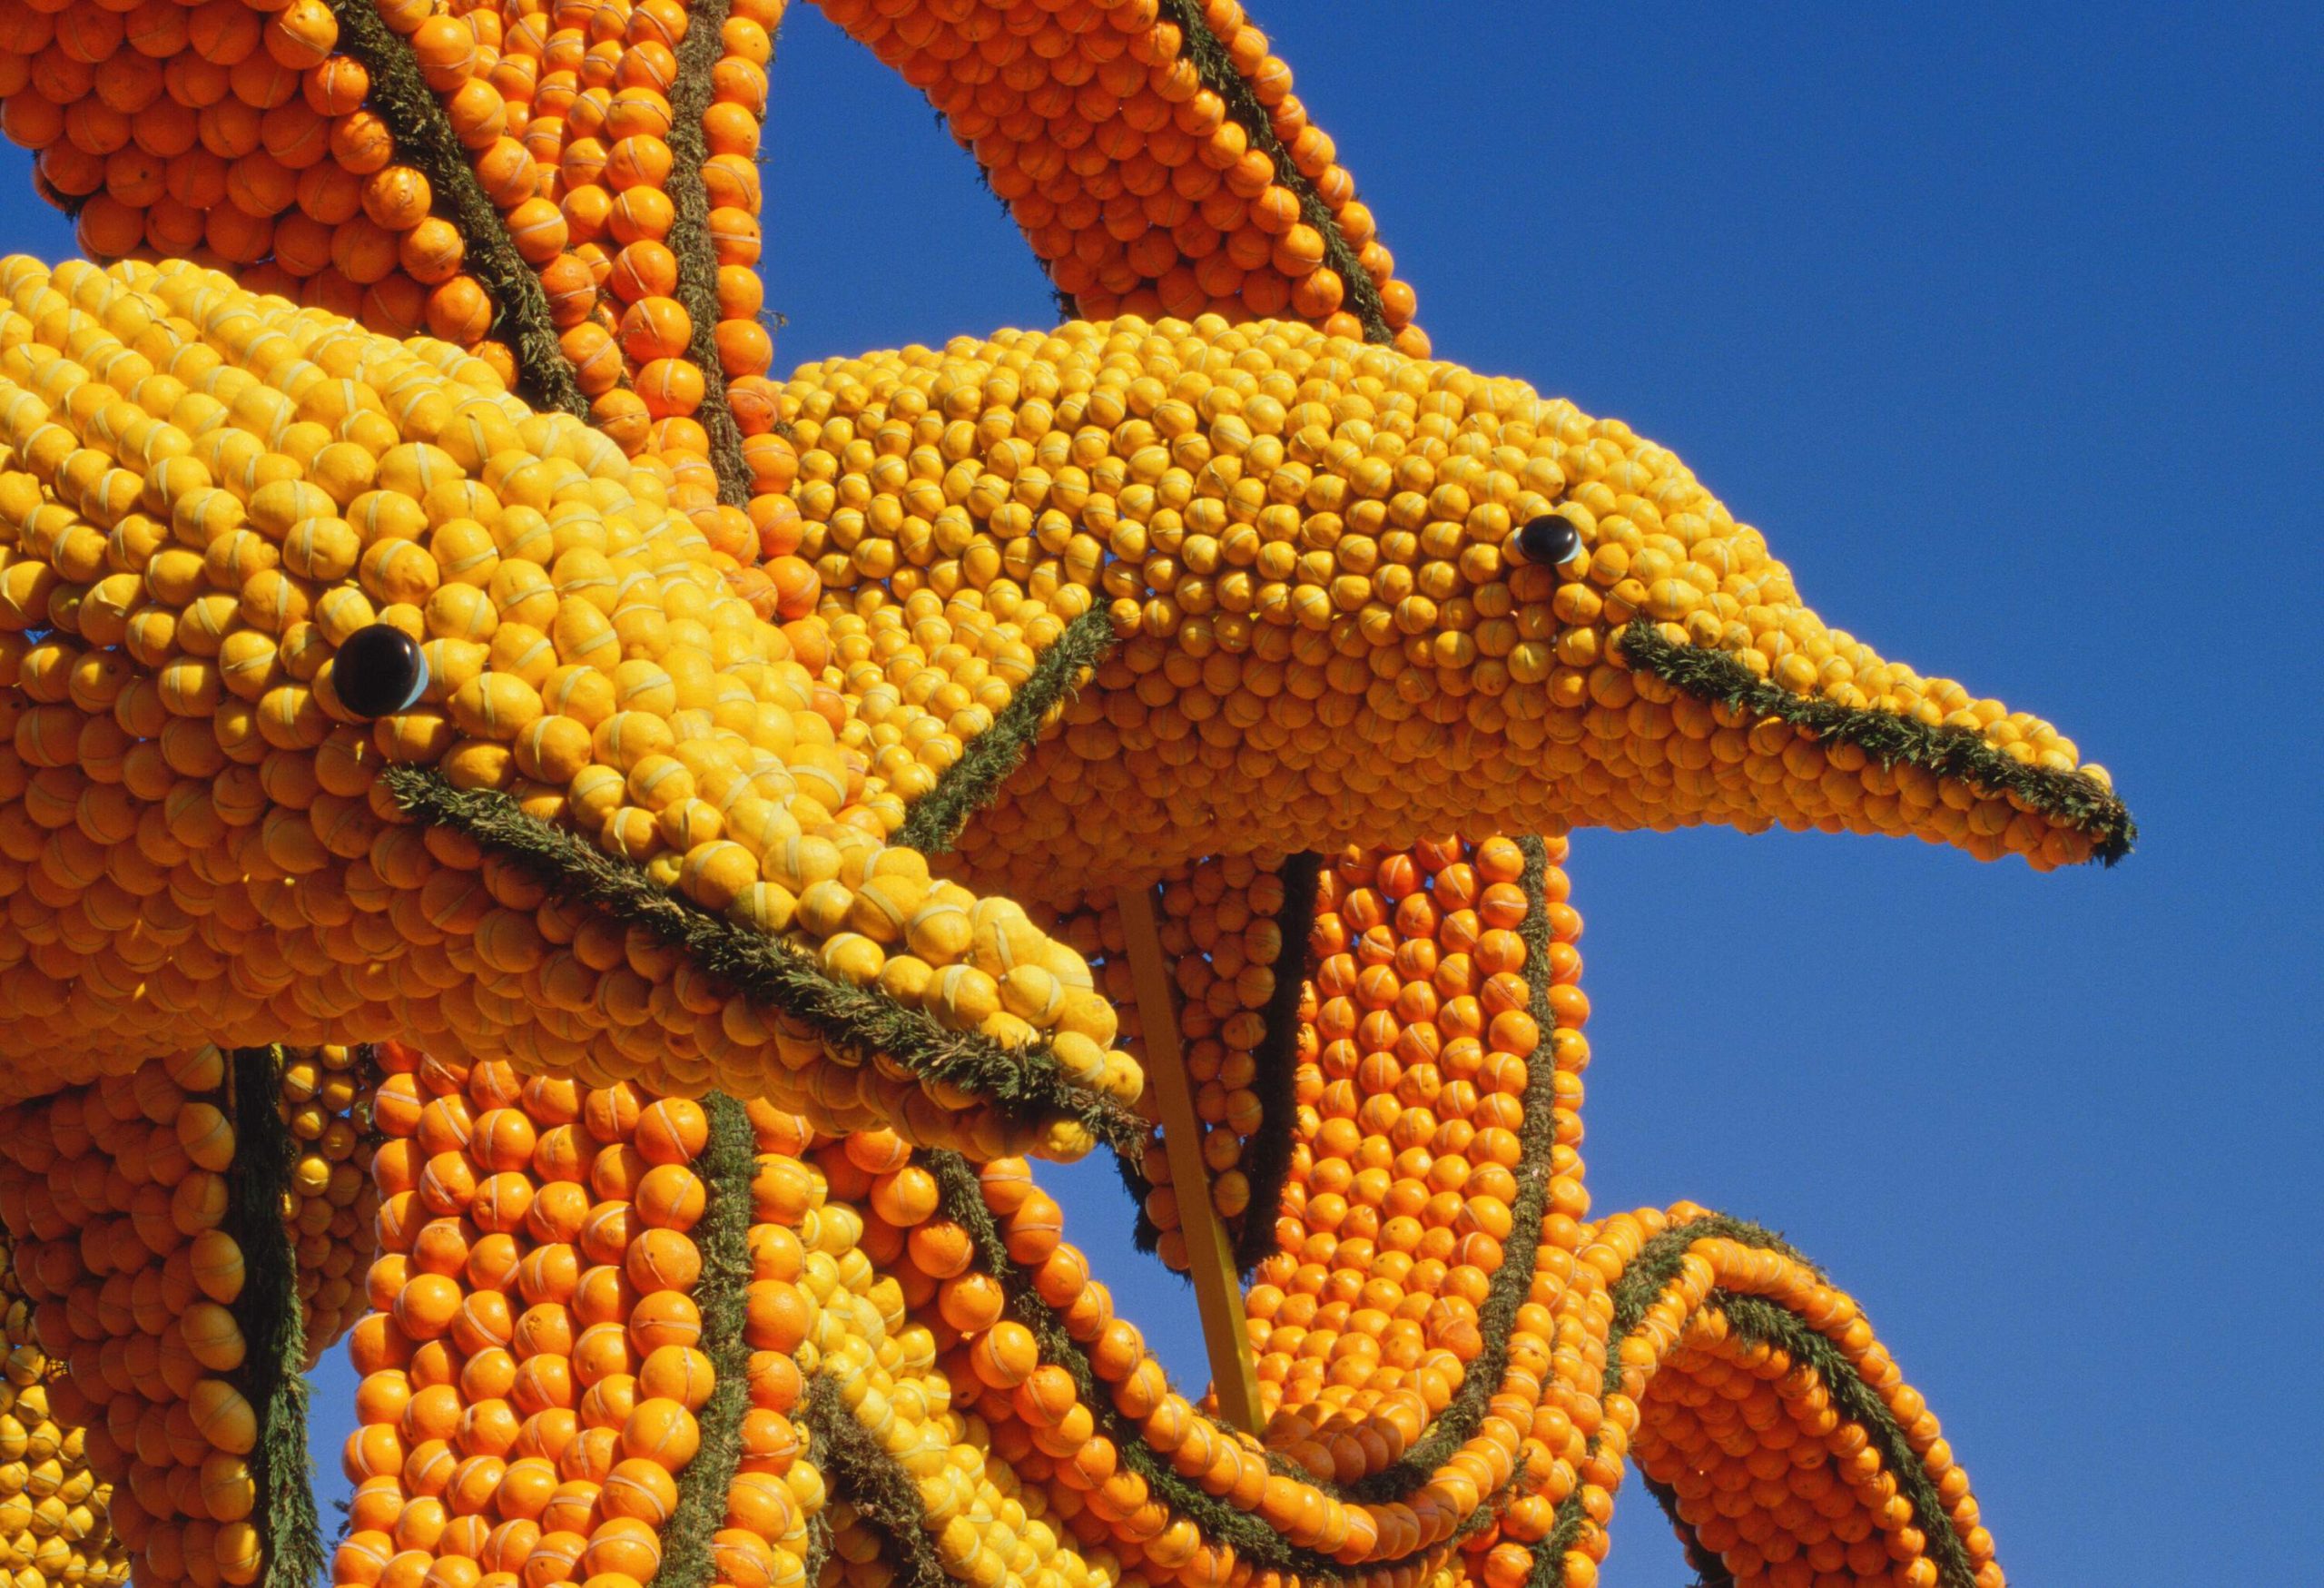 Dolphin shaped sculpture made out of lemons and oranges